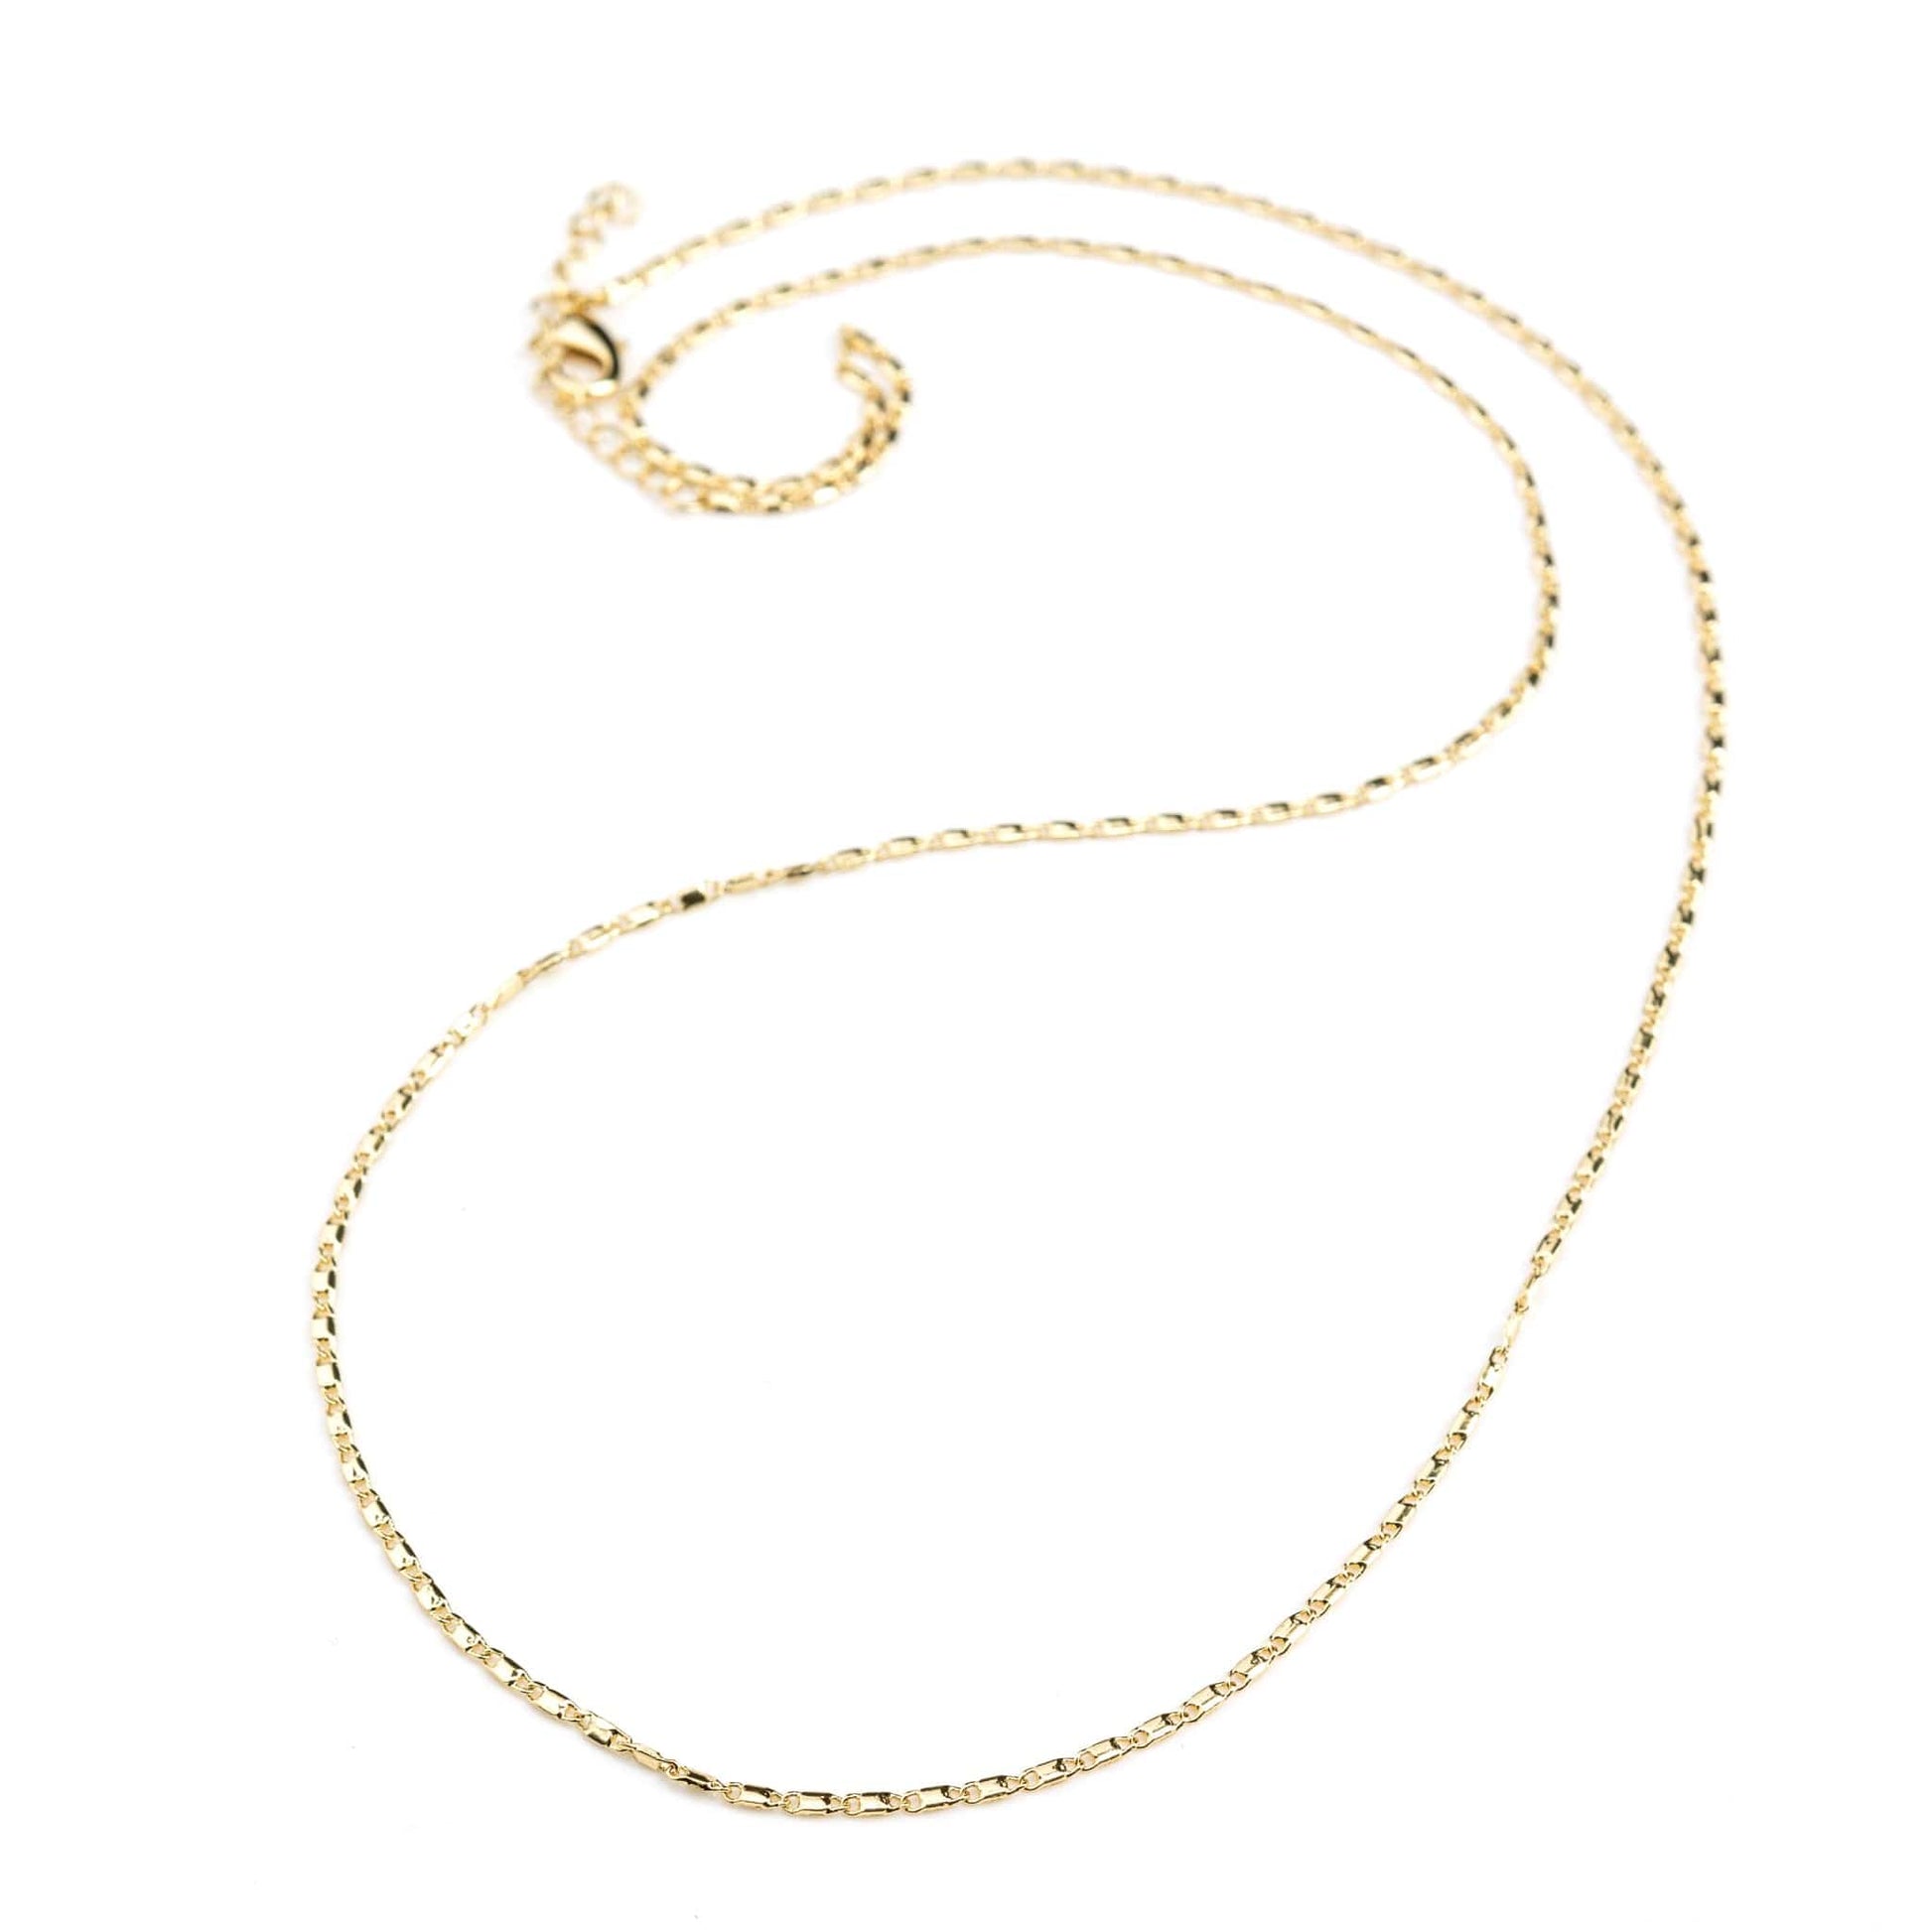 Delicate Singapore gold chain 19 inches for layering